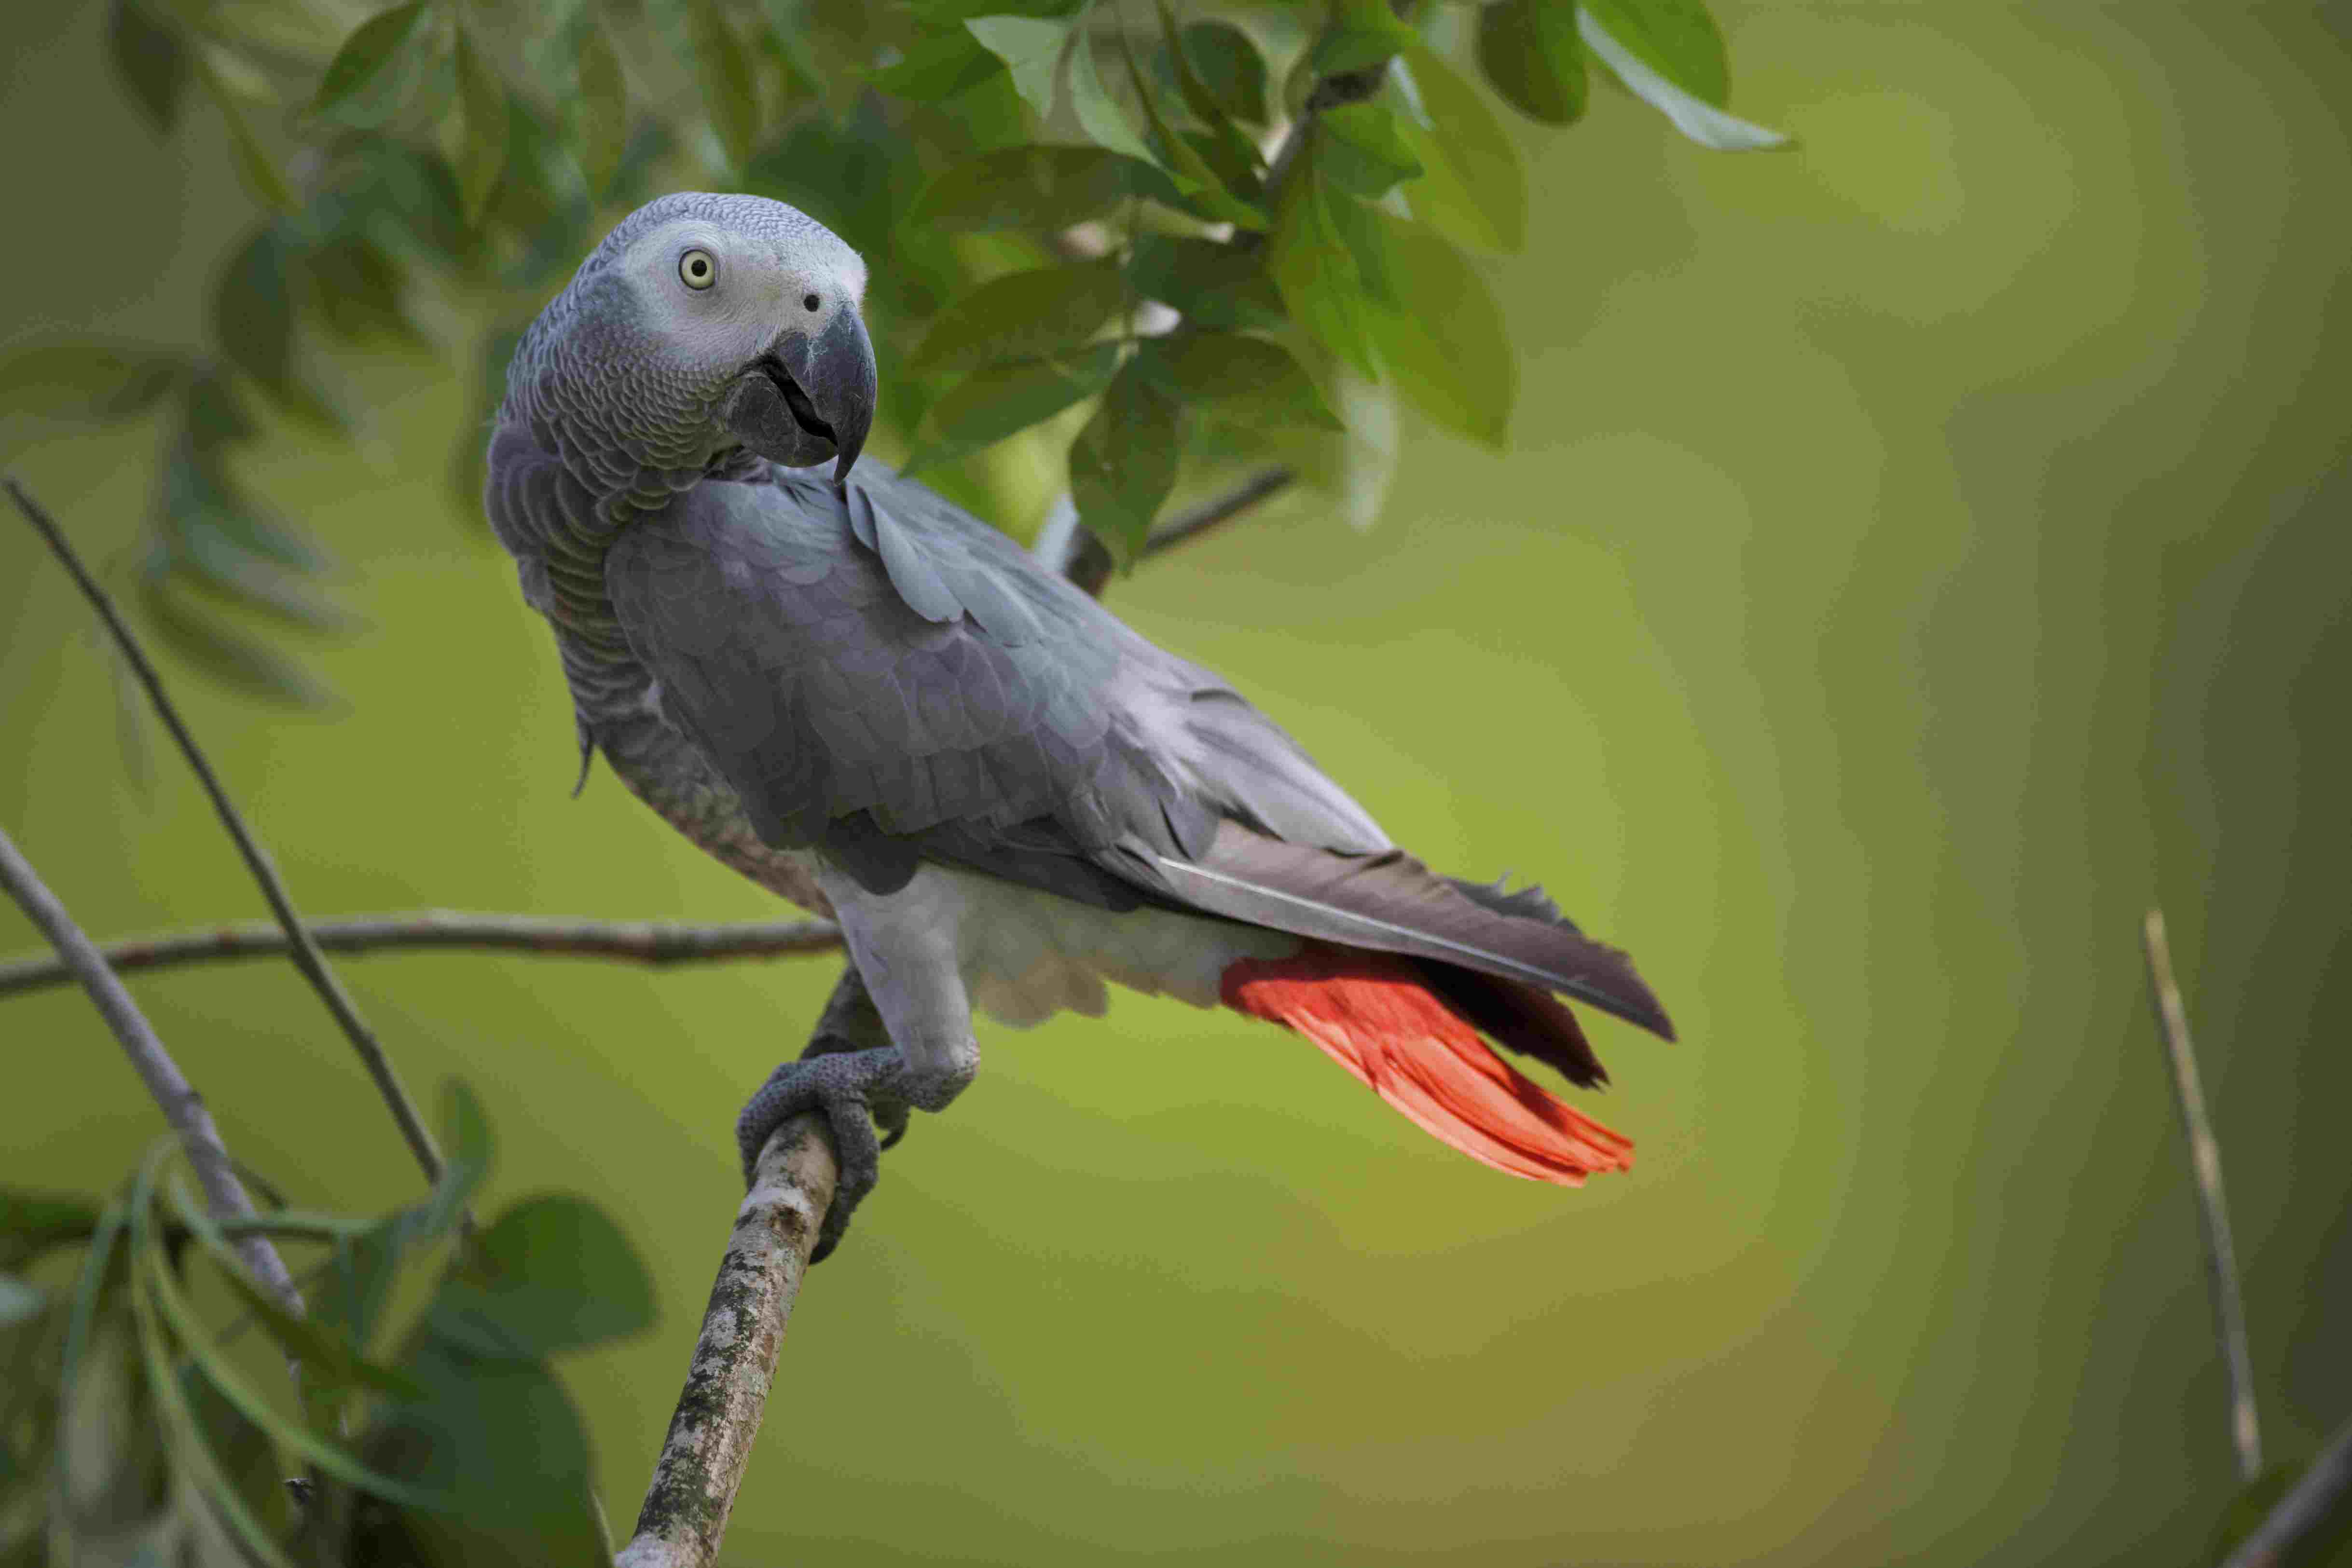 Grey Green Bird Logo - Facts About African Grey Parrots